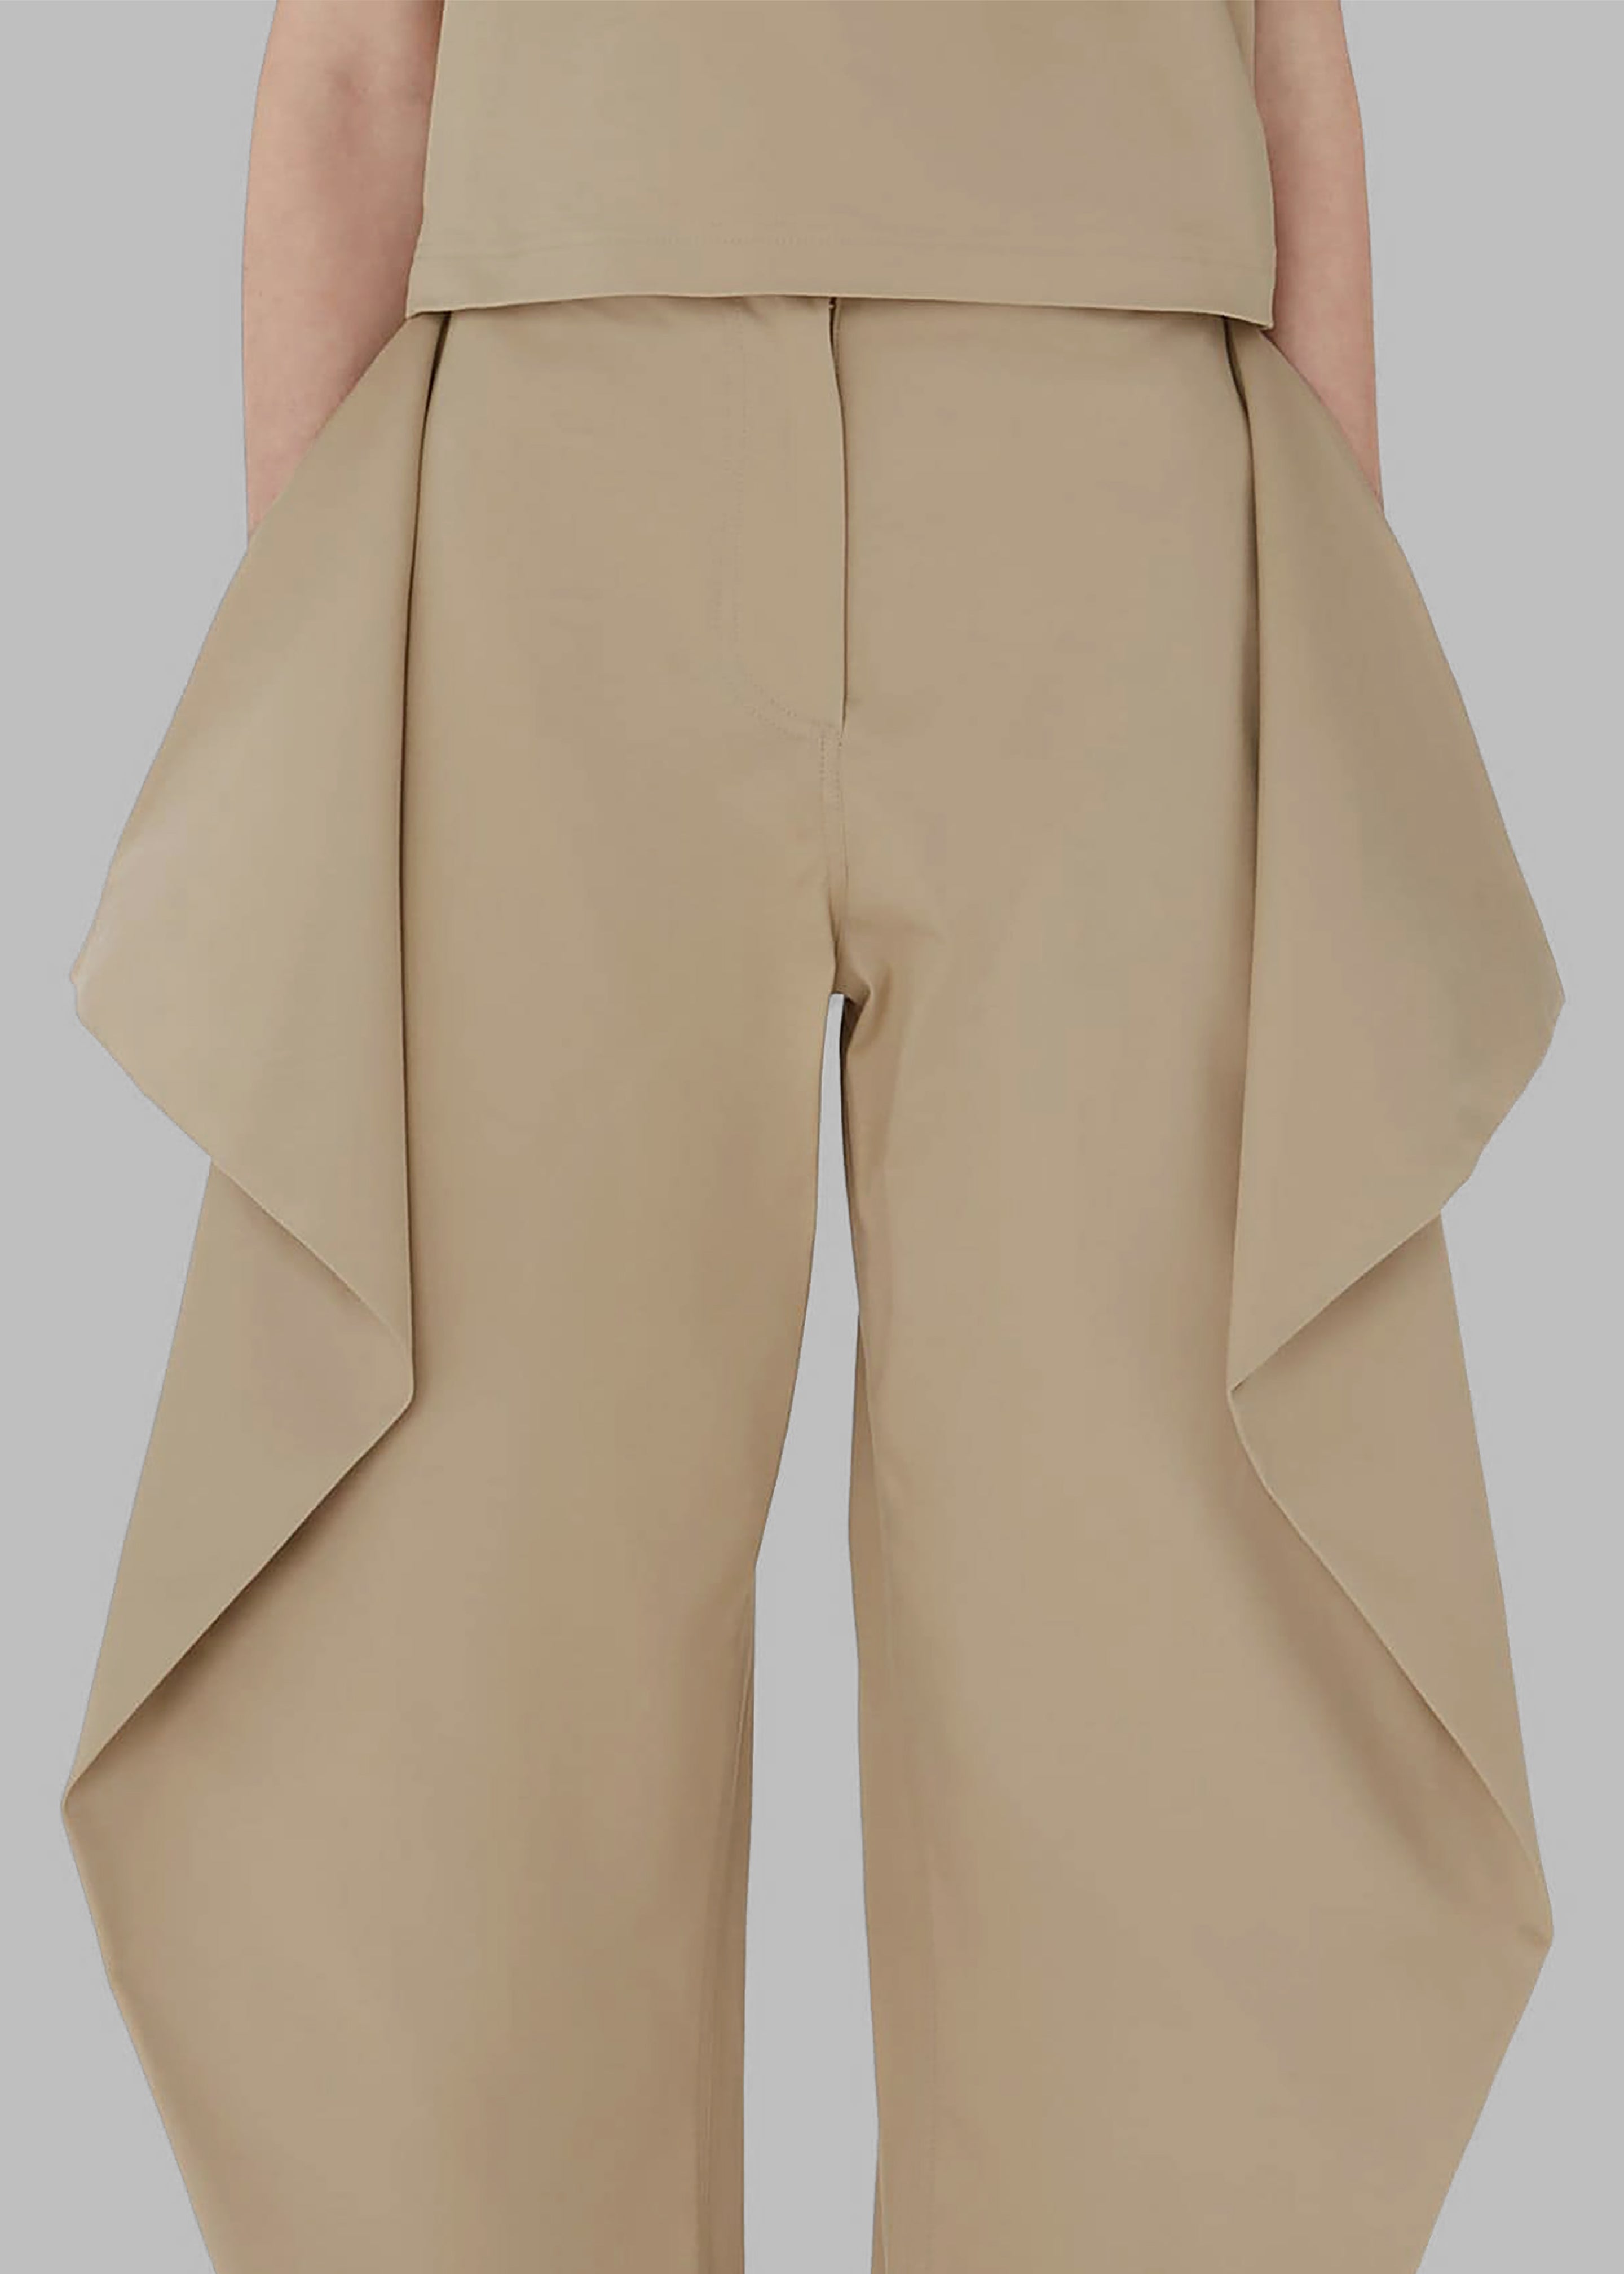 JW Anderson Kite Trousers - Flax - 6